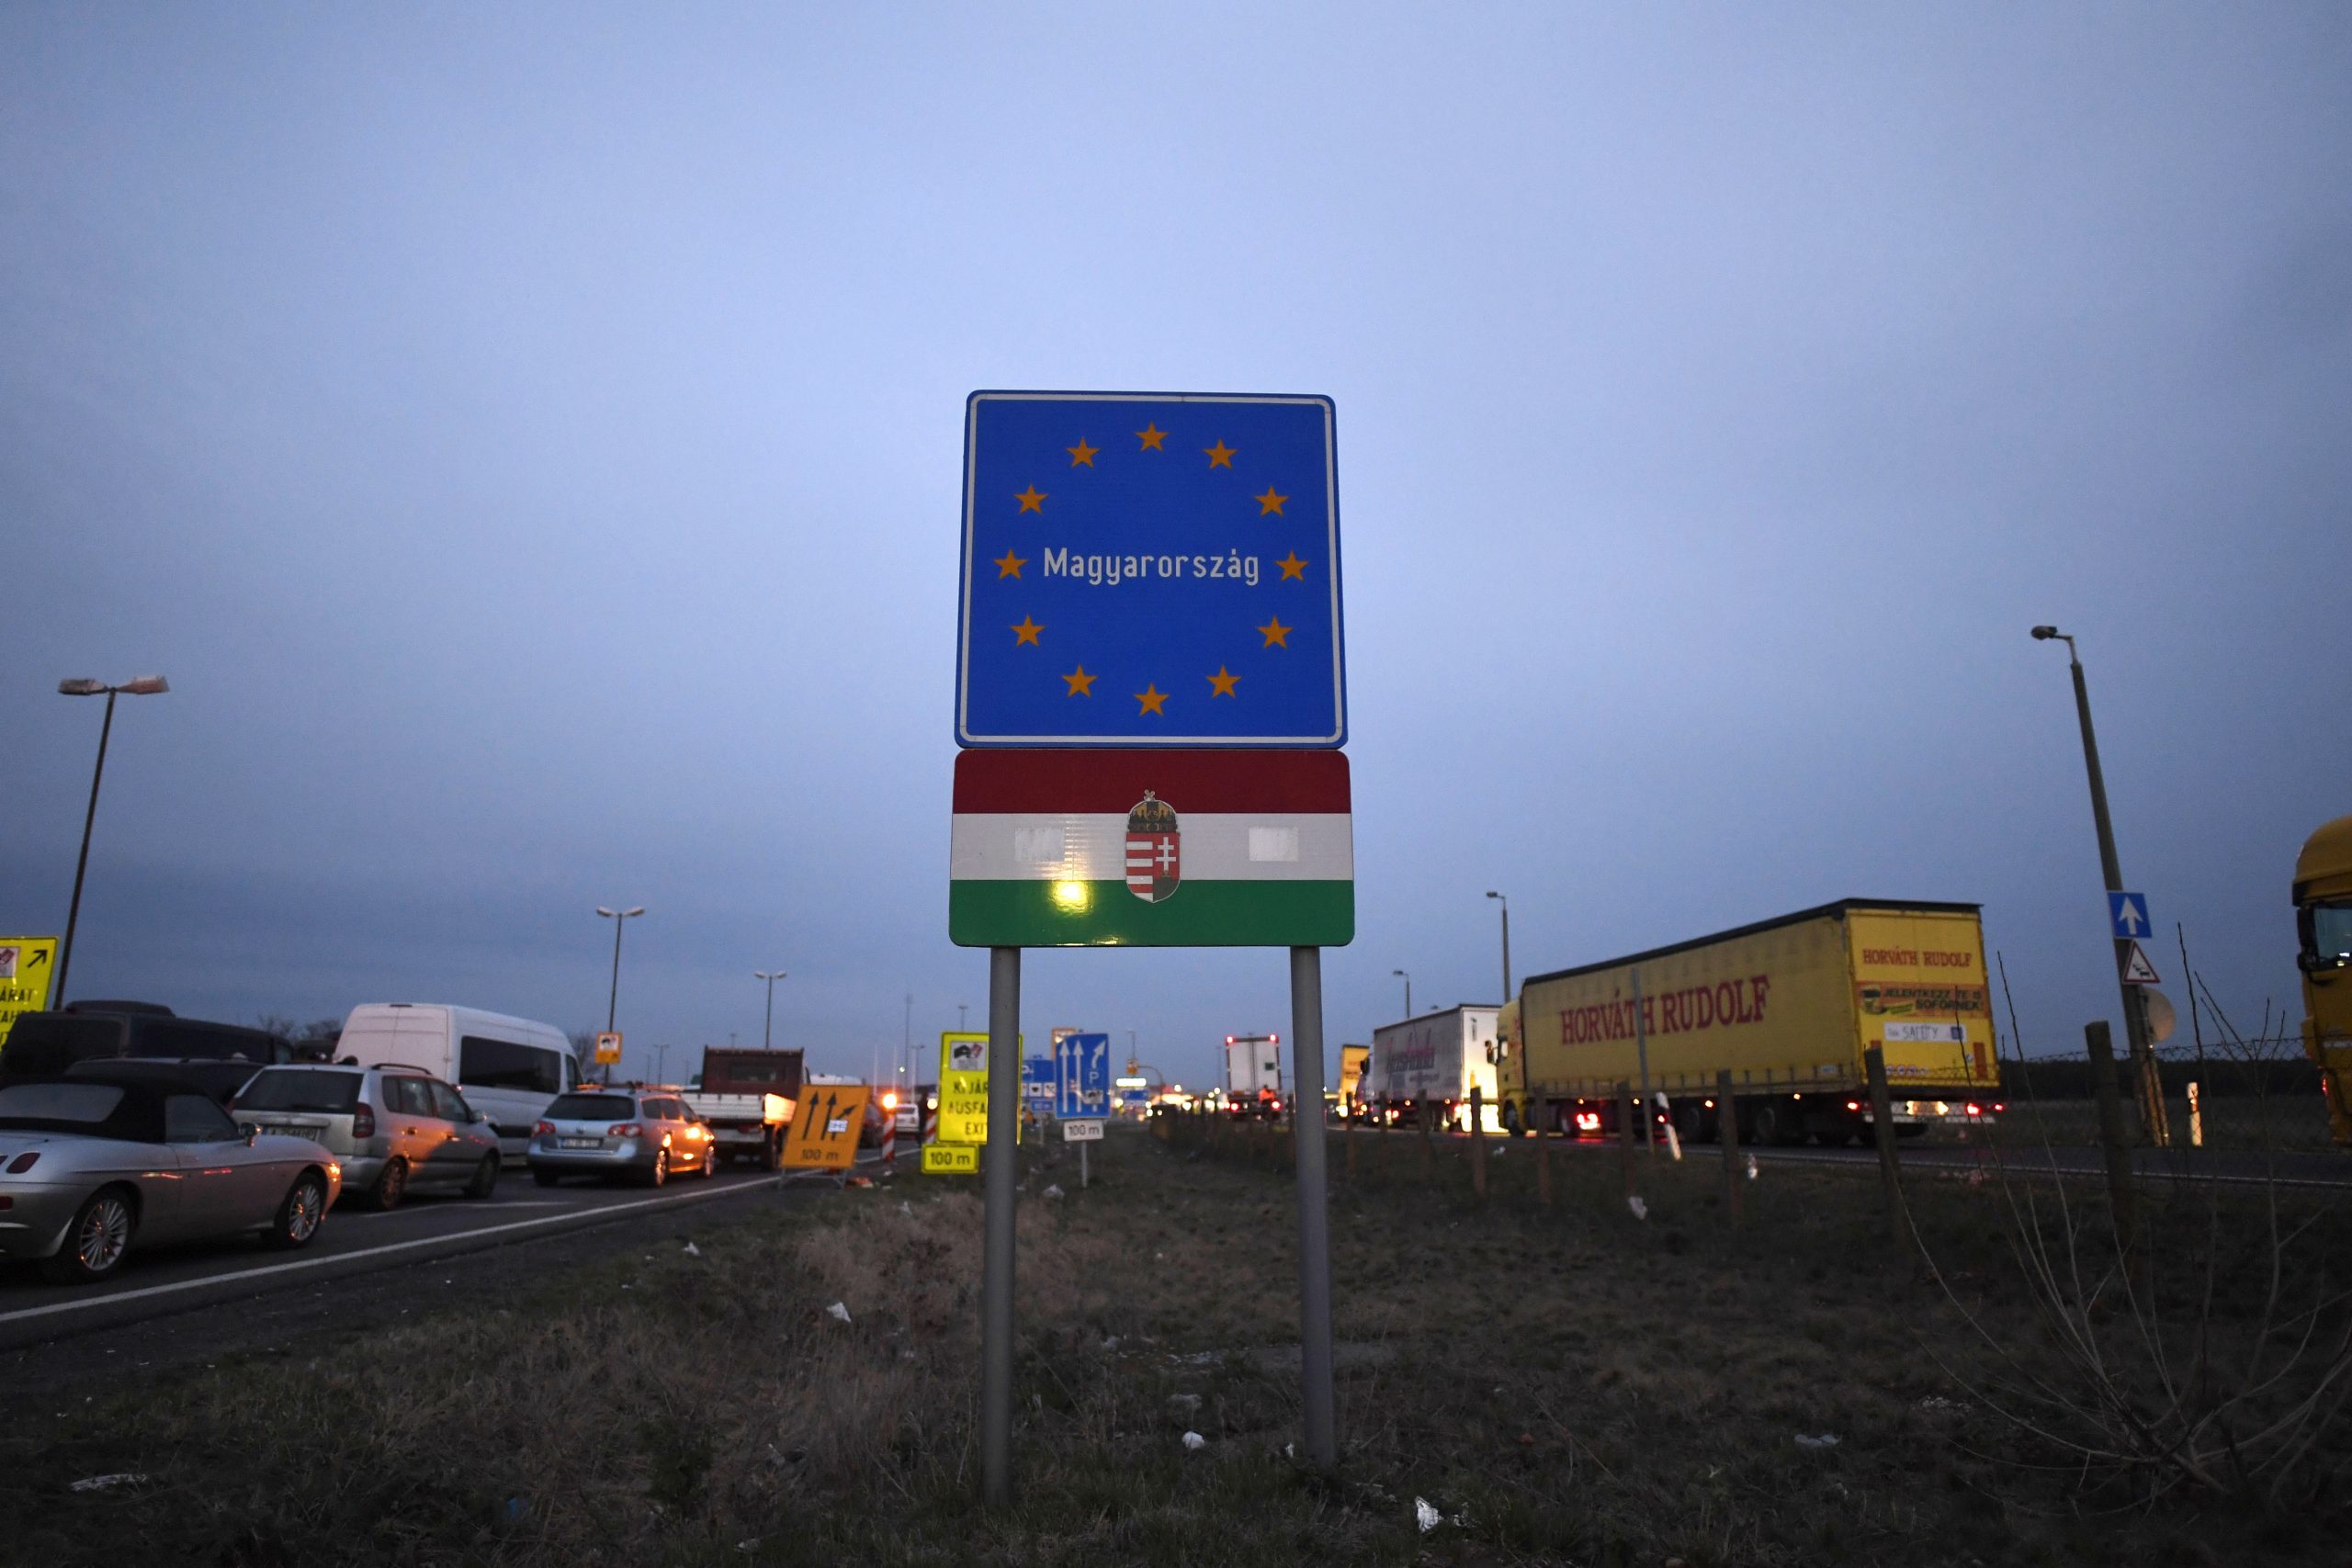 Hungary Border Closure Strikes EU as Unexpected Restriction